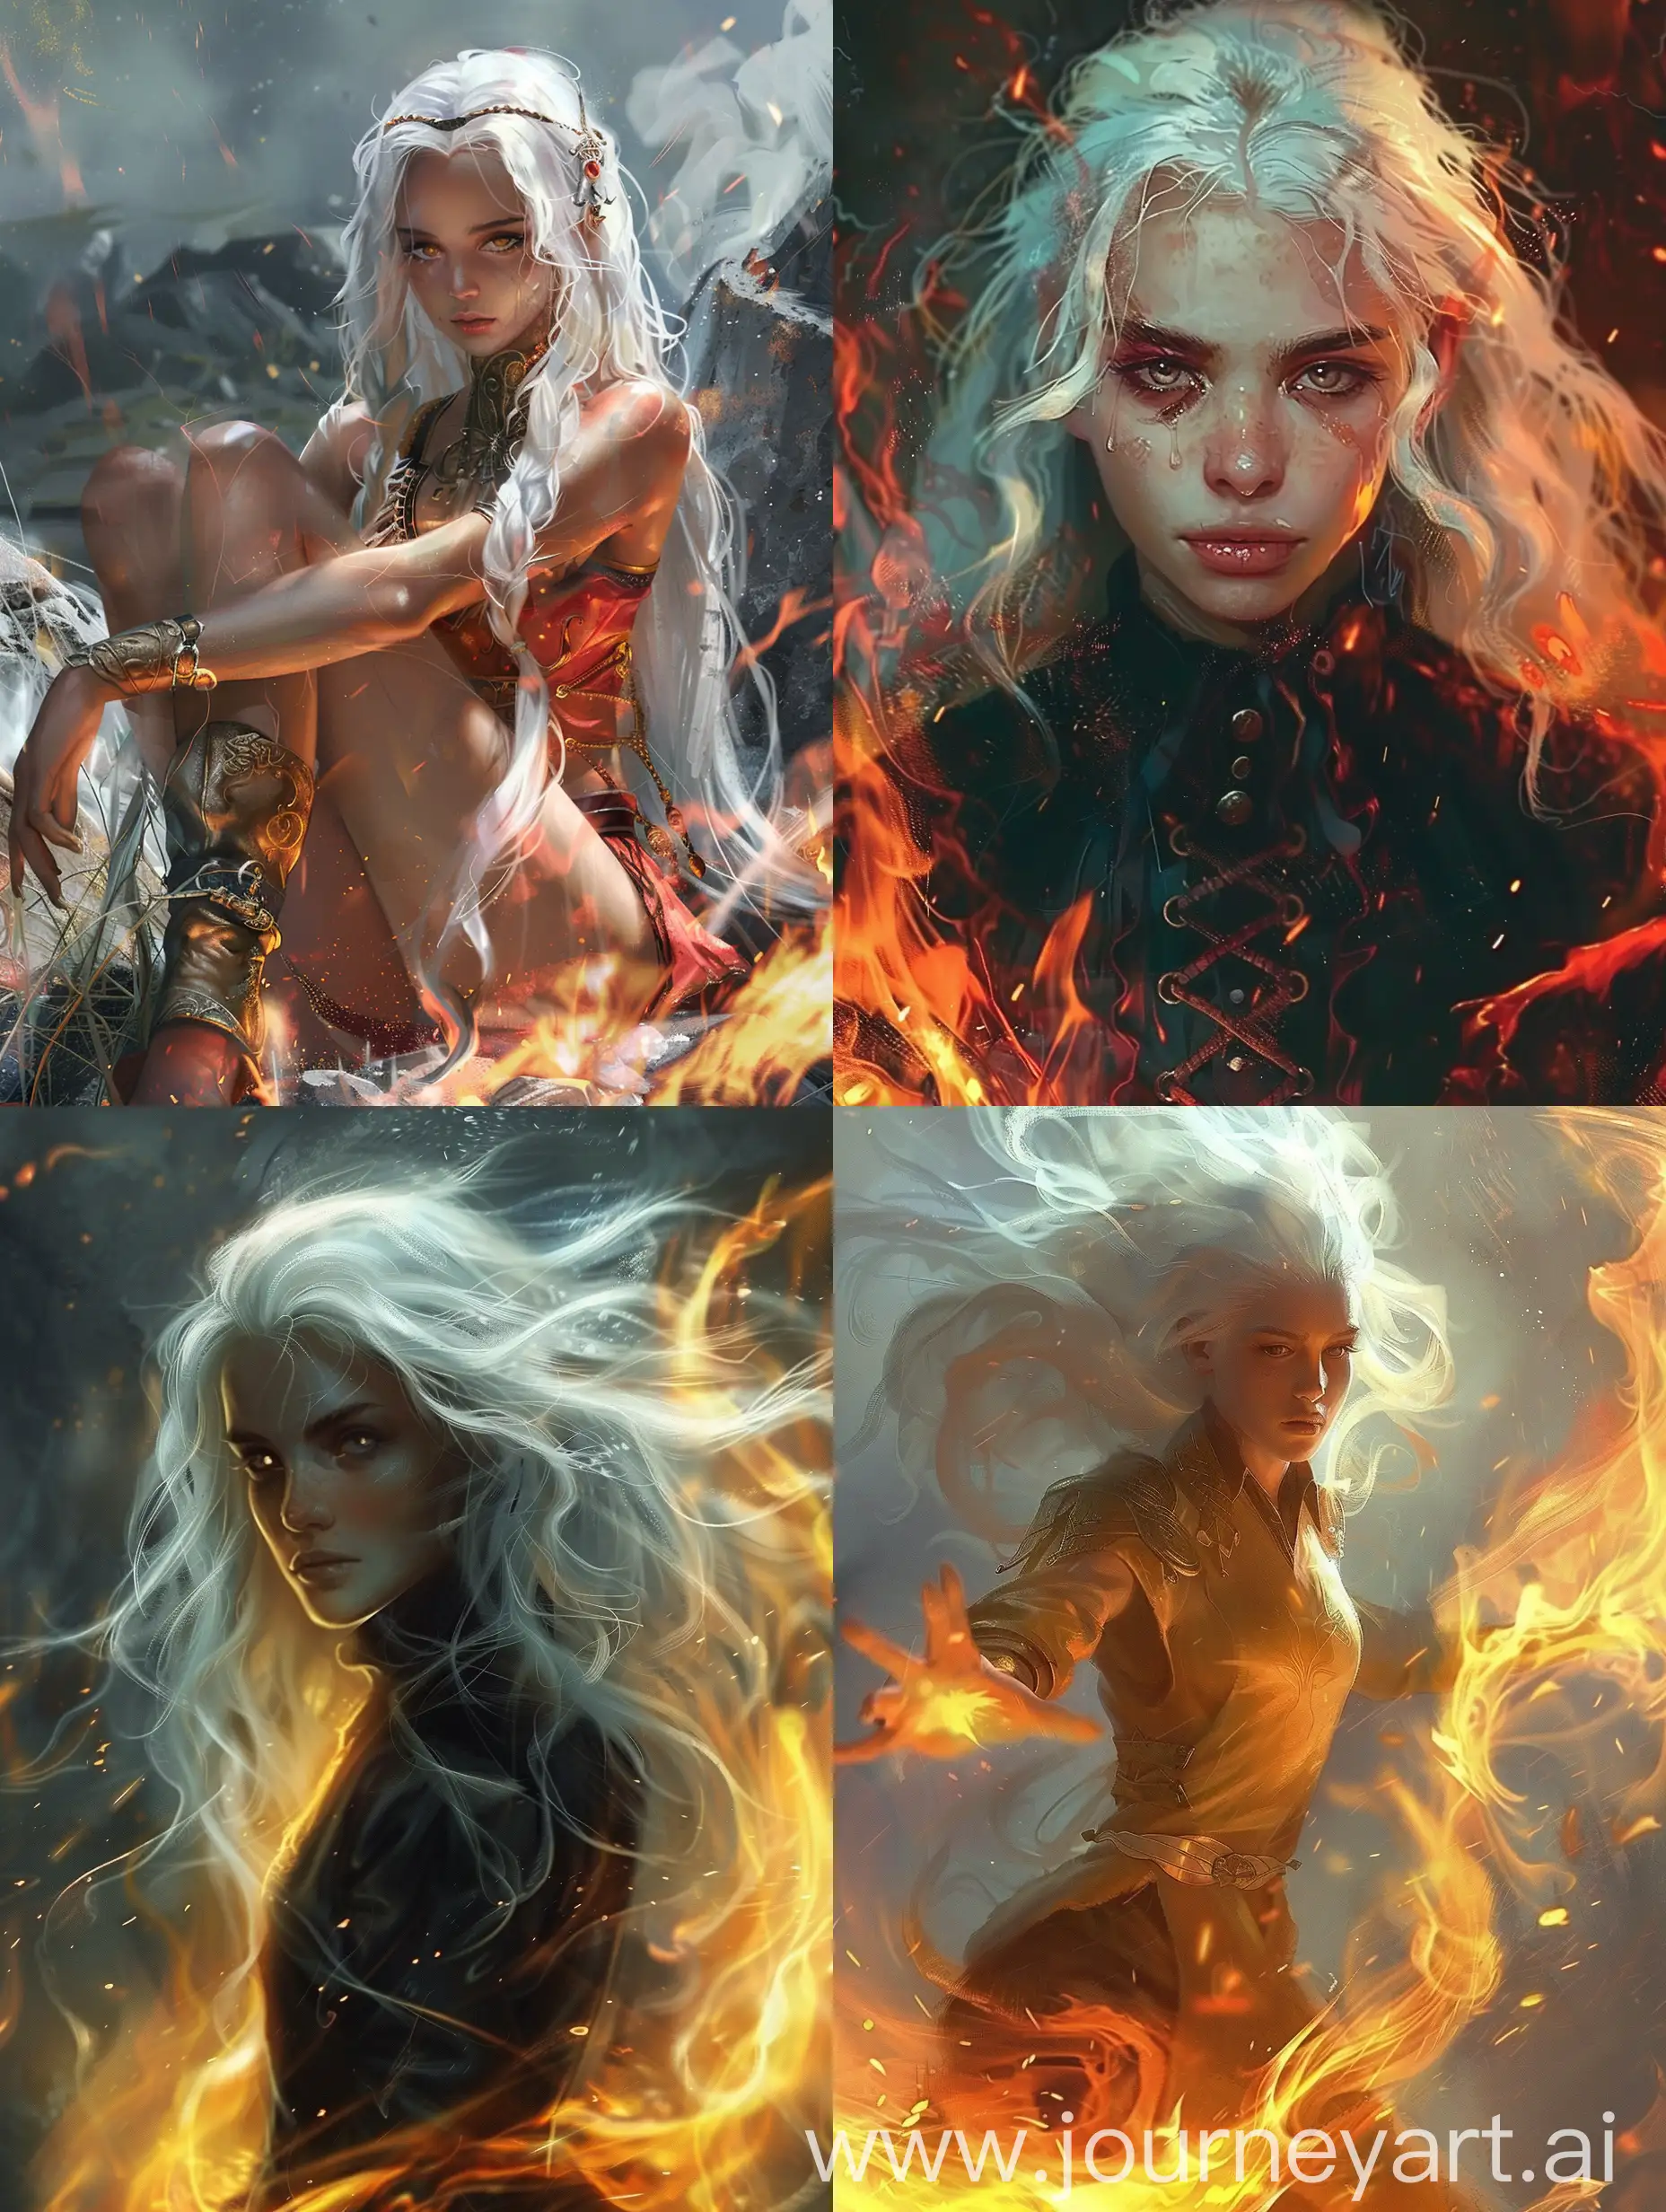 Fantasy-Transmigration-WhiteHaired-Girl-Wielding-Fire-Magic